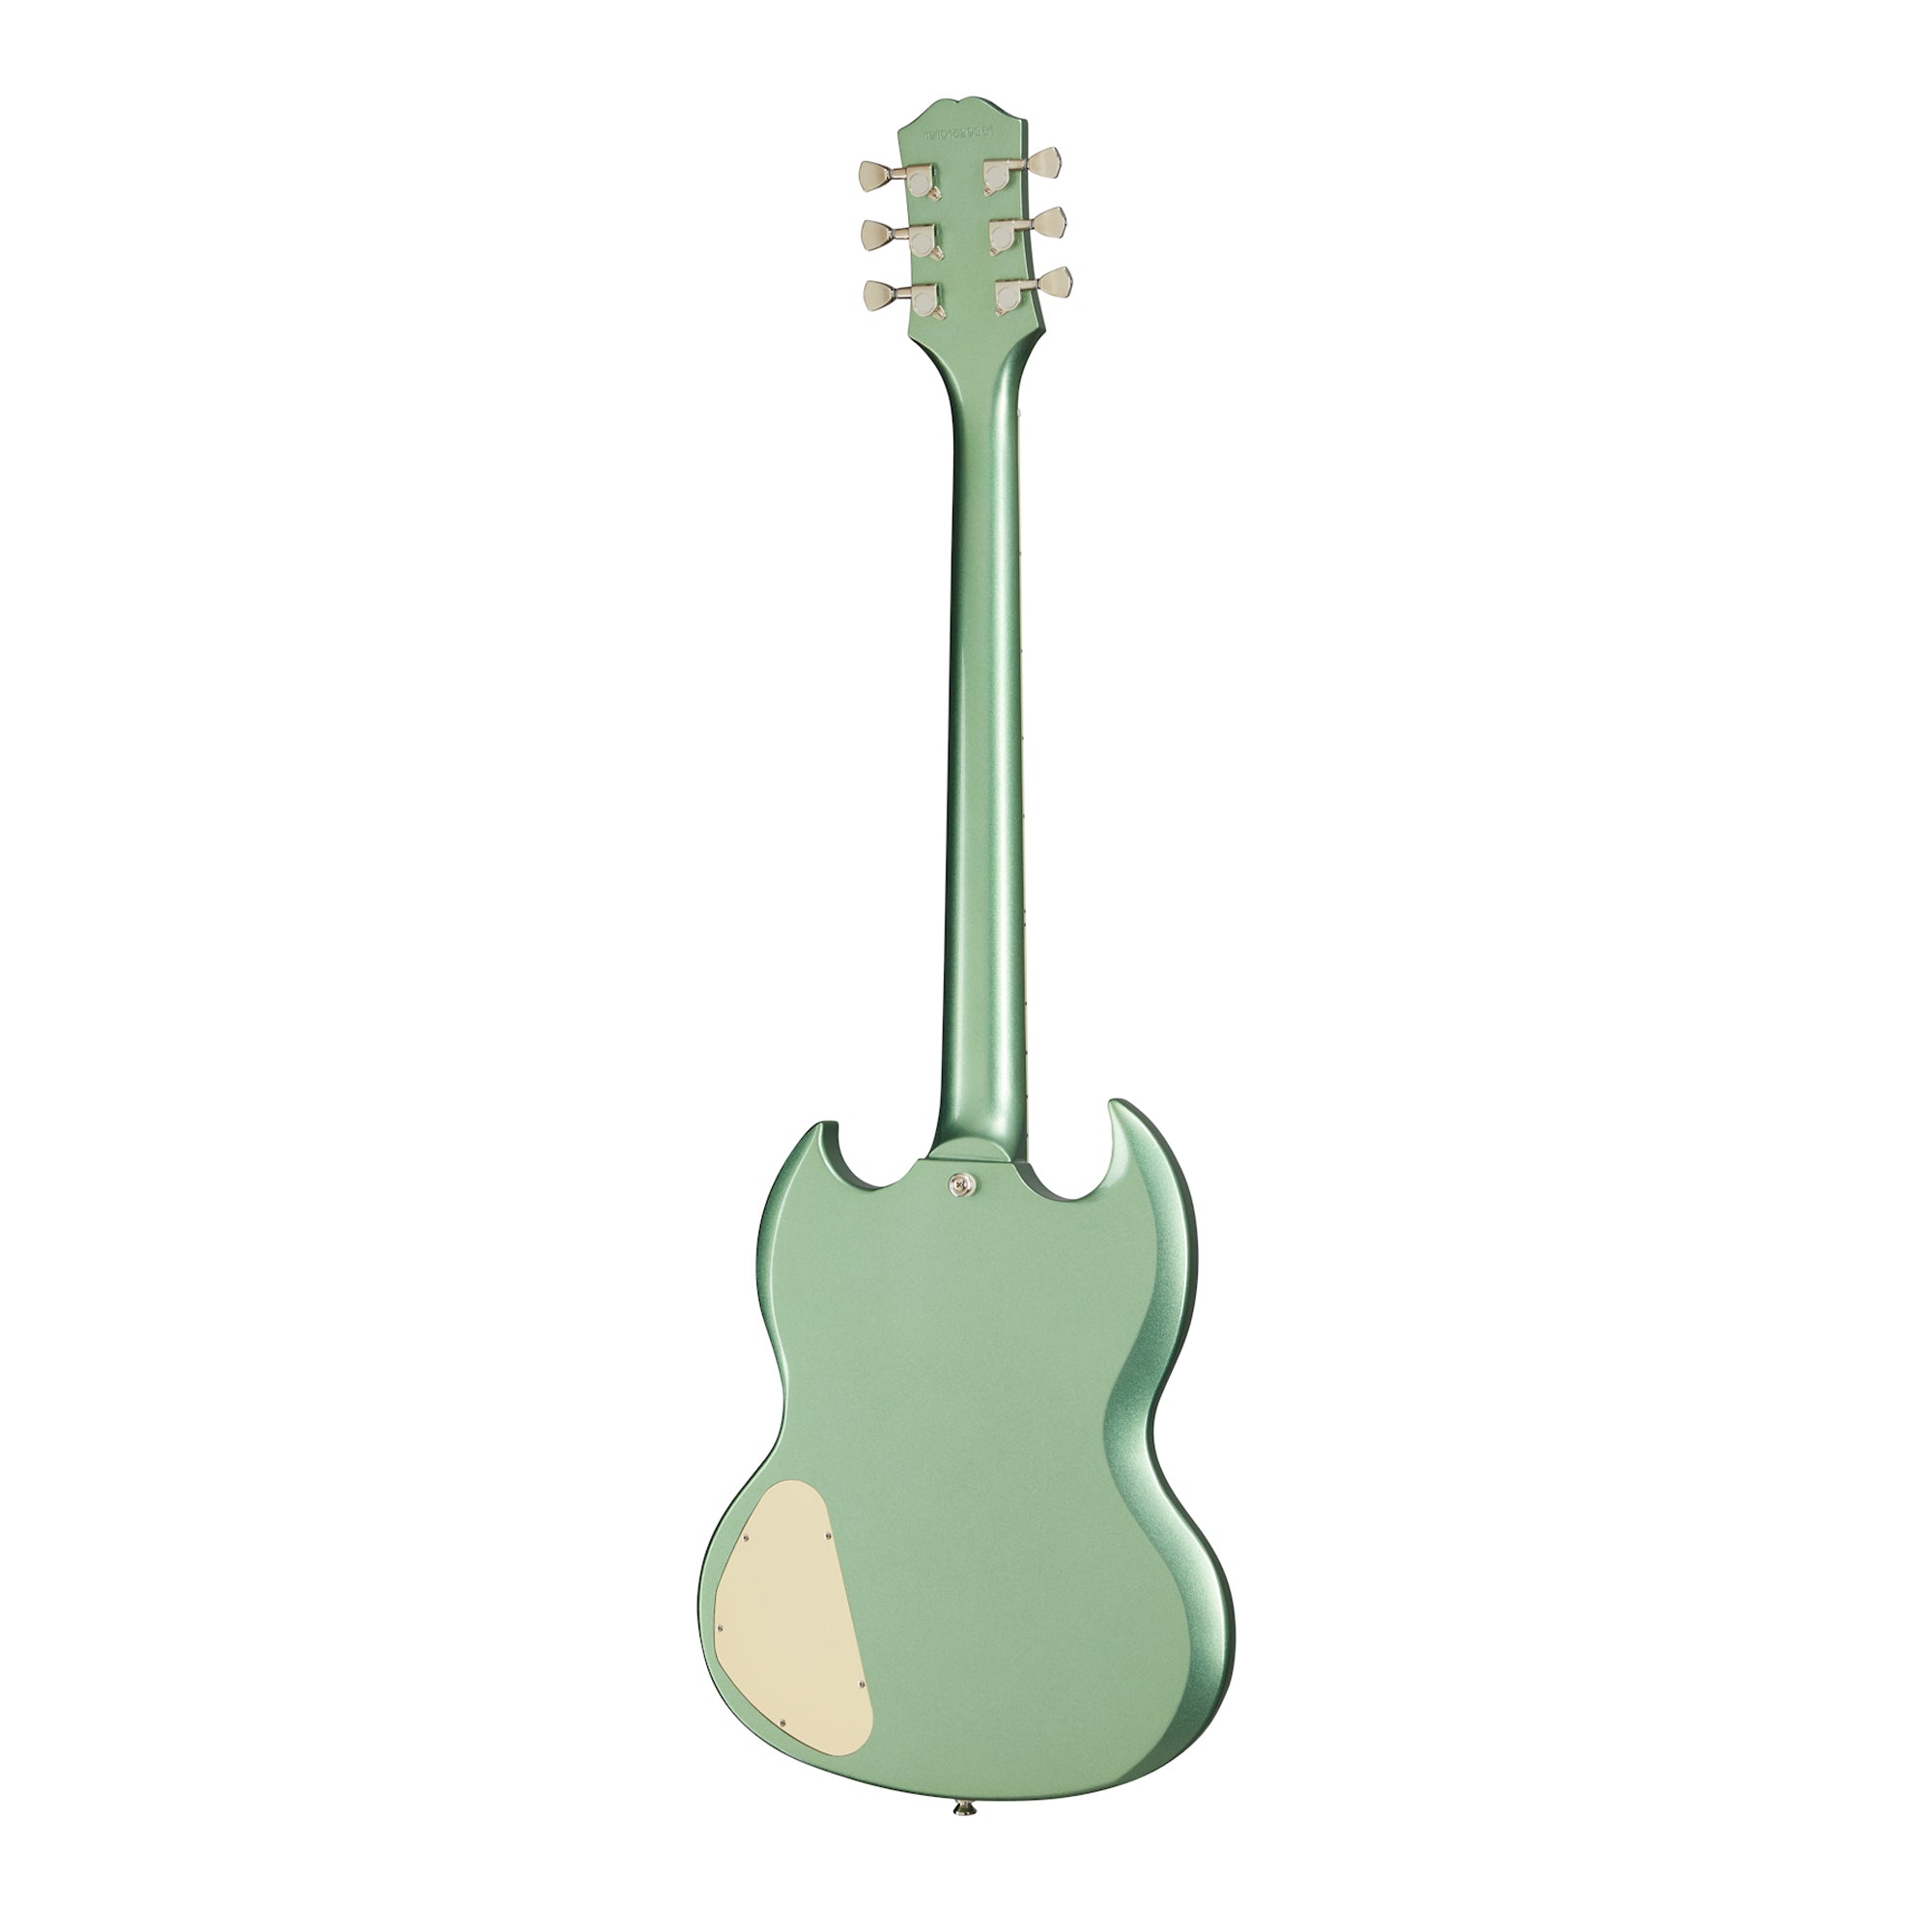 Epiphone ENMSWGMNH1 SG Muse Wanderlust Green Electric Guitar